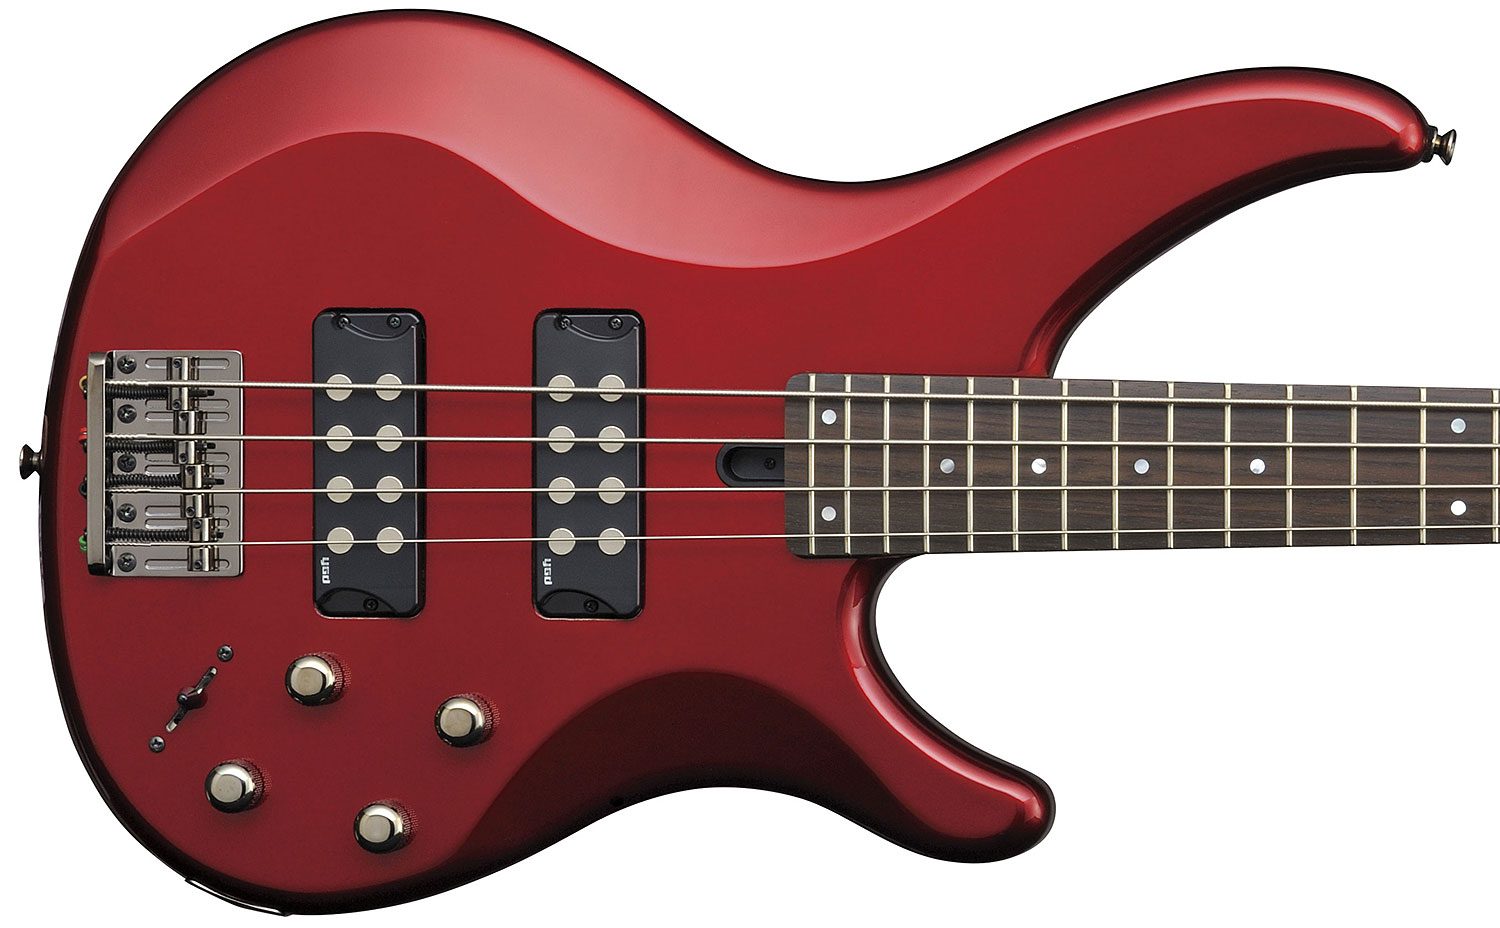 Yamaha Trbx304 Car - Candy Apple Red - Solid body electric bass - Variation 2